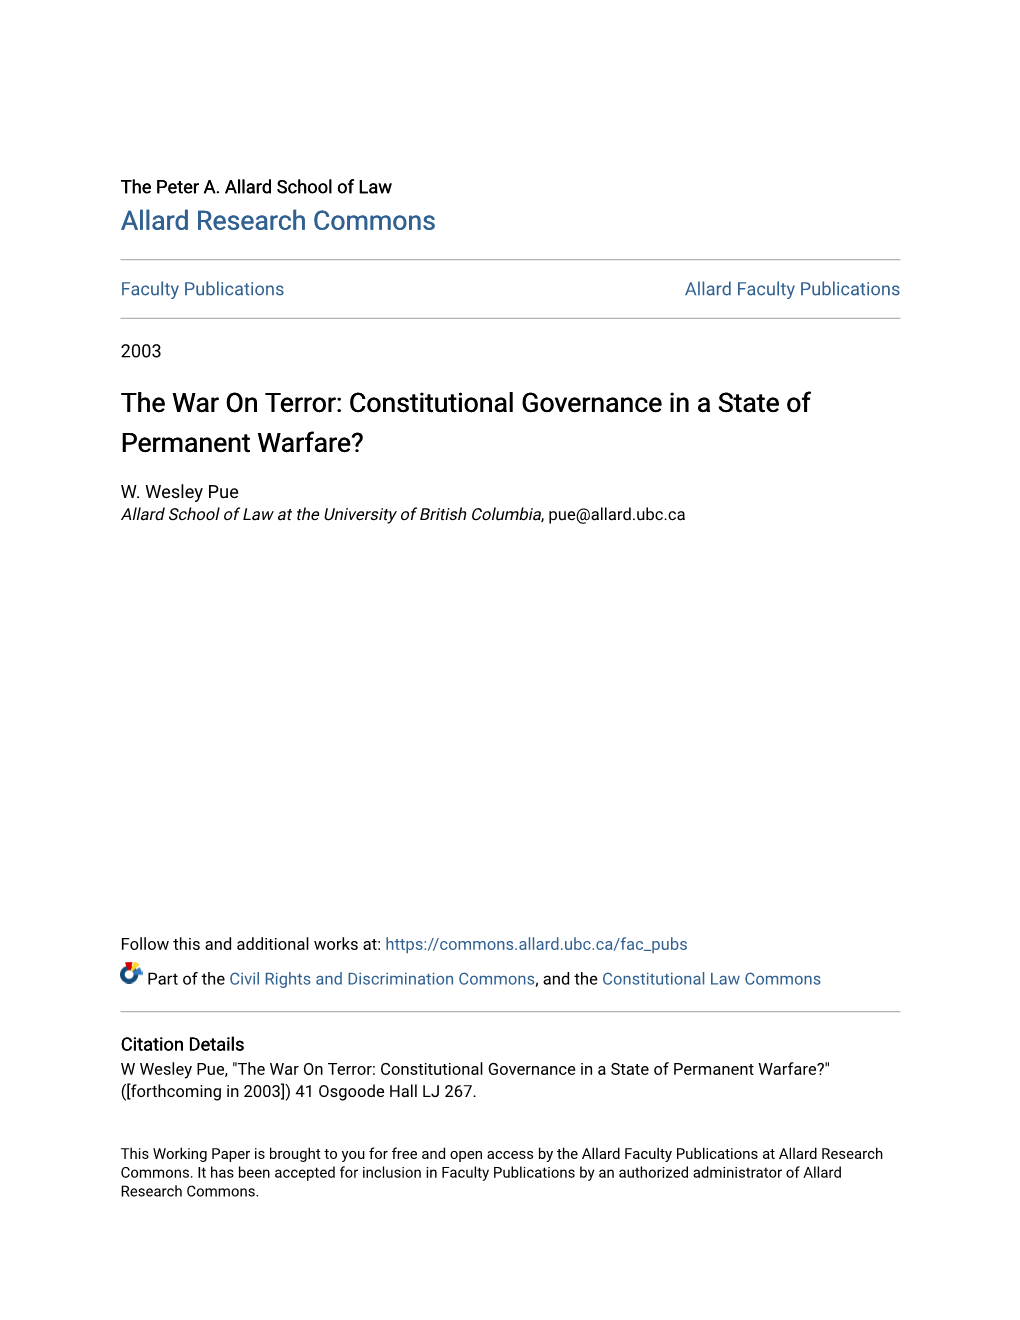 The War on Terror: Constitutional Governance in a State of Permanent Warfare?